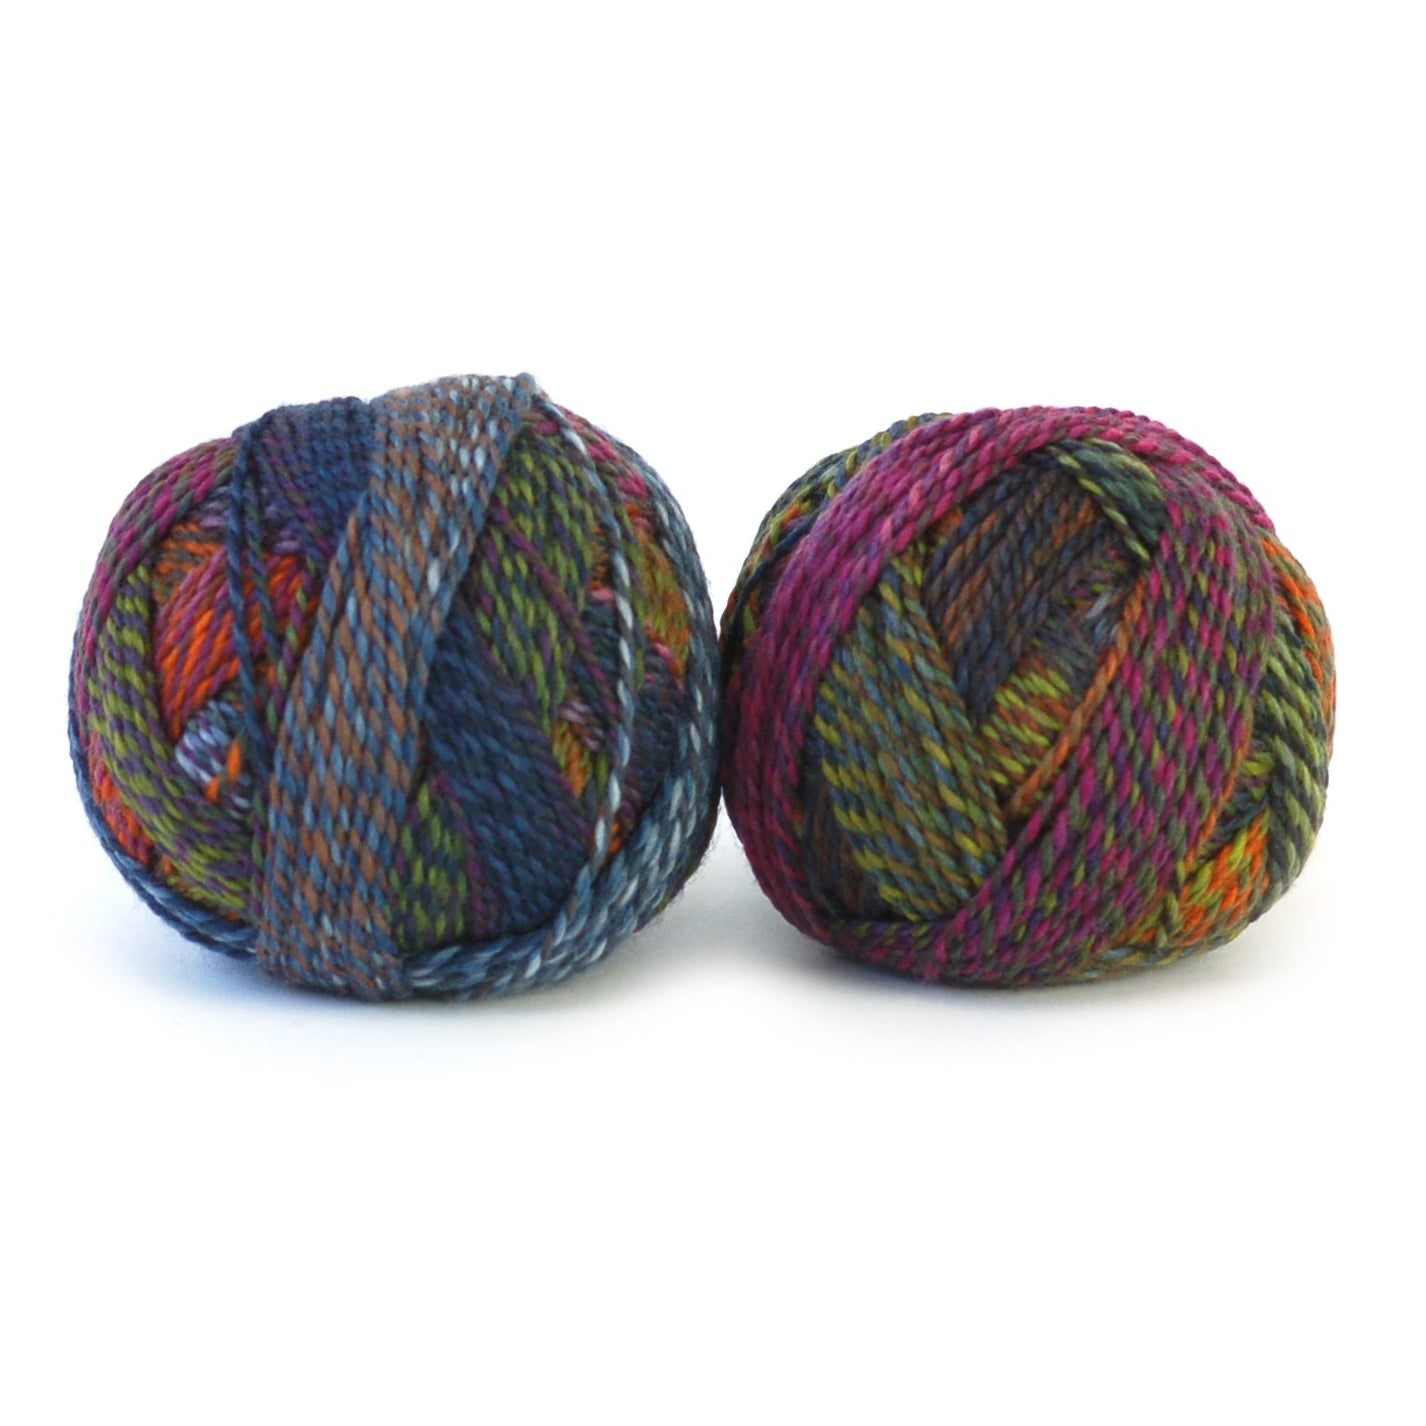 Schoppel-Wolle Edition 3 wool yarn color red, purple, green, and blue